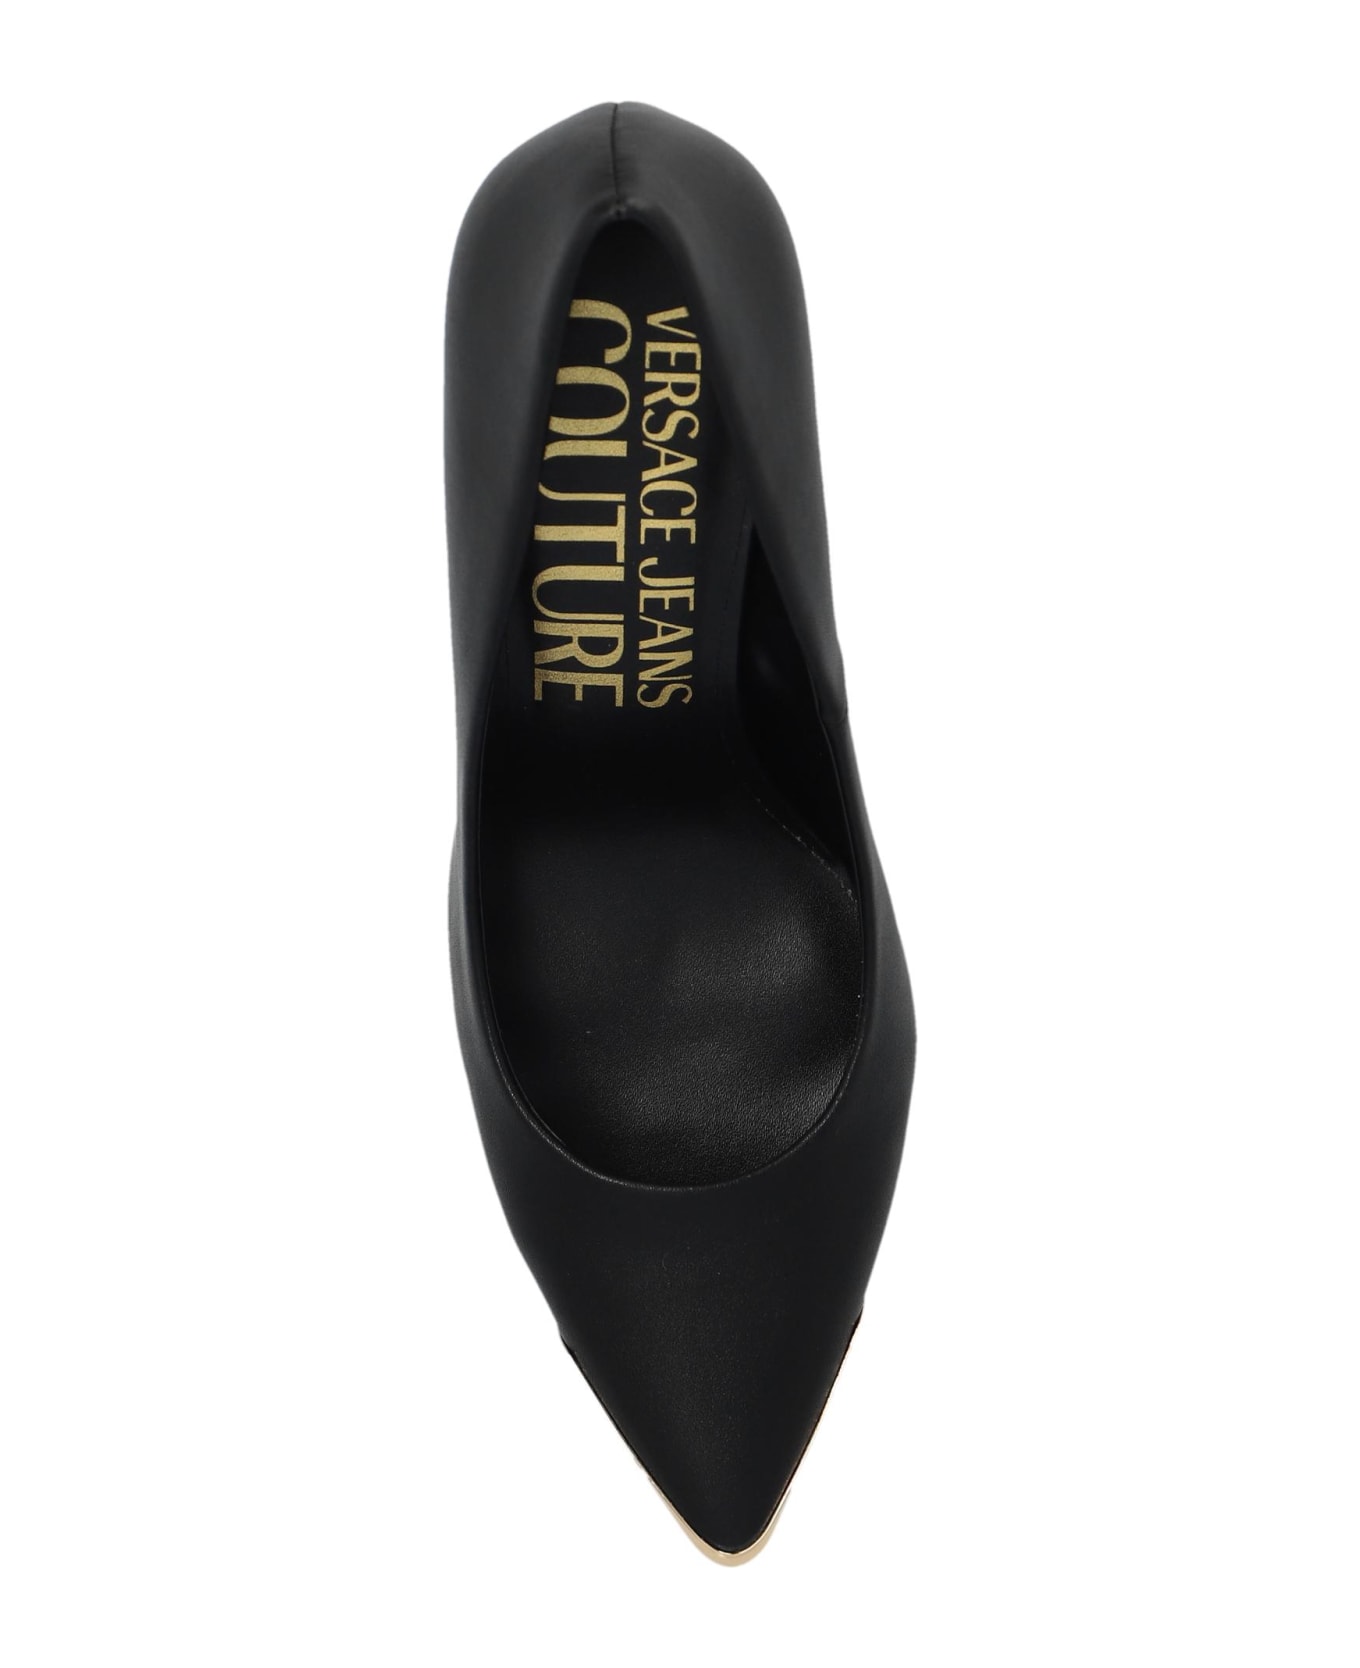 Versace Jeans Couture Leather Pumps - Black ハイヒール